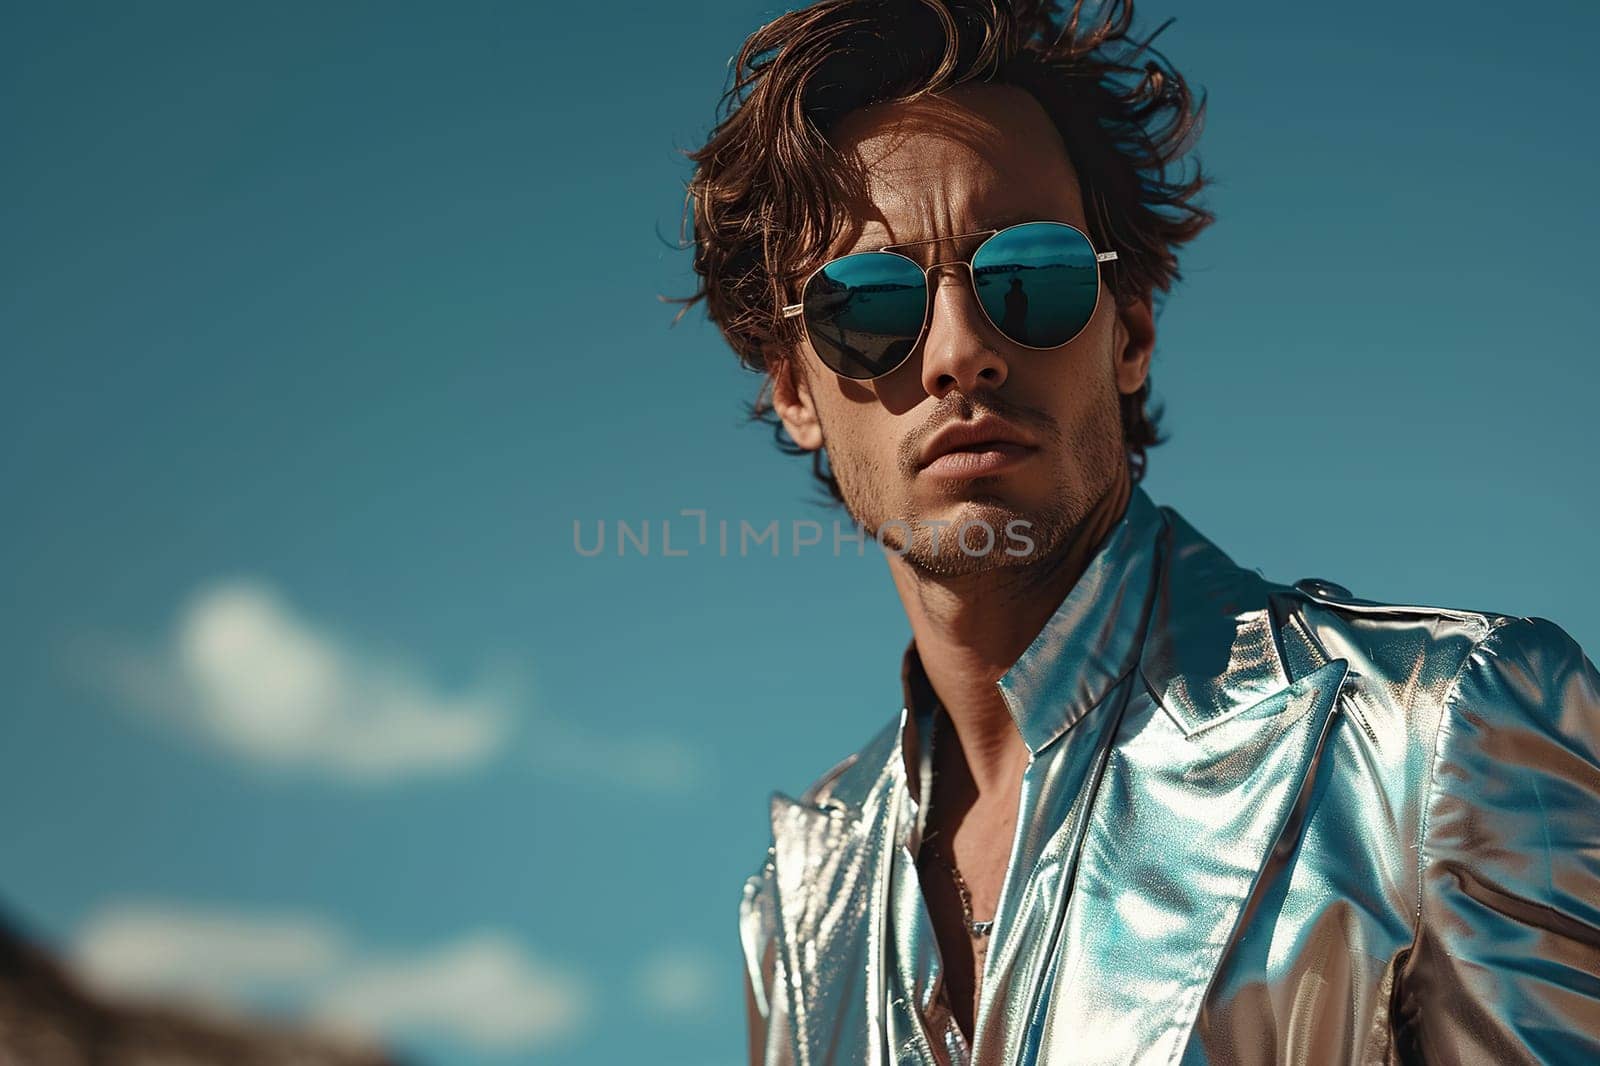 Attractive young man posing in a metallic suit. High fashion concept.